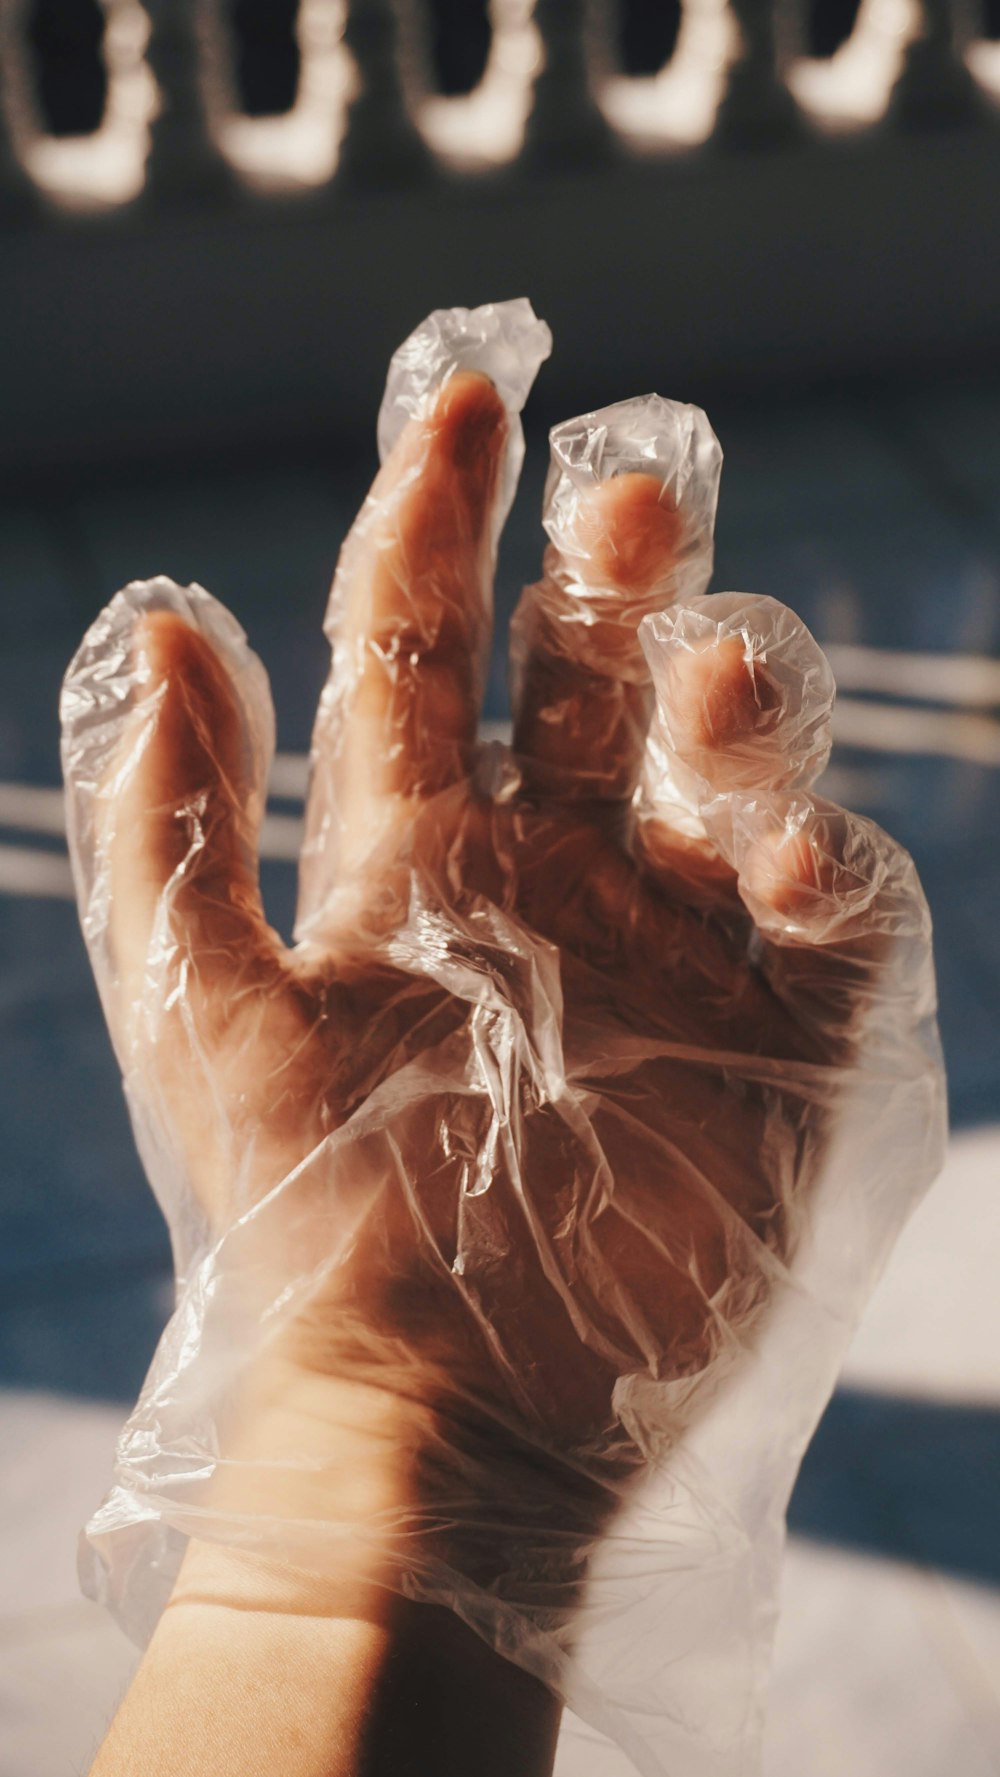 person holding clear plastic bag